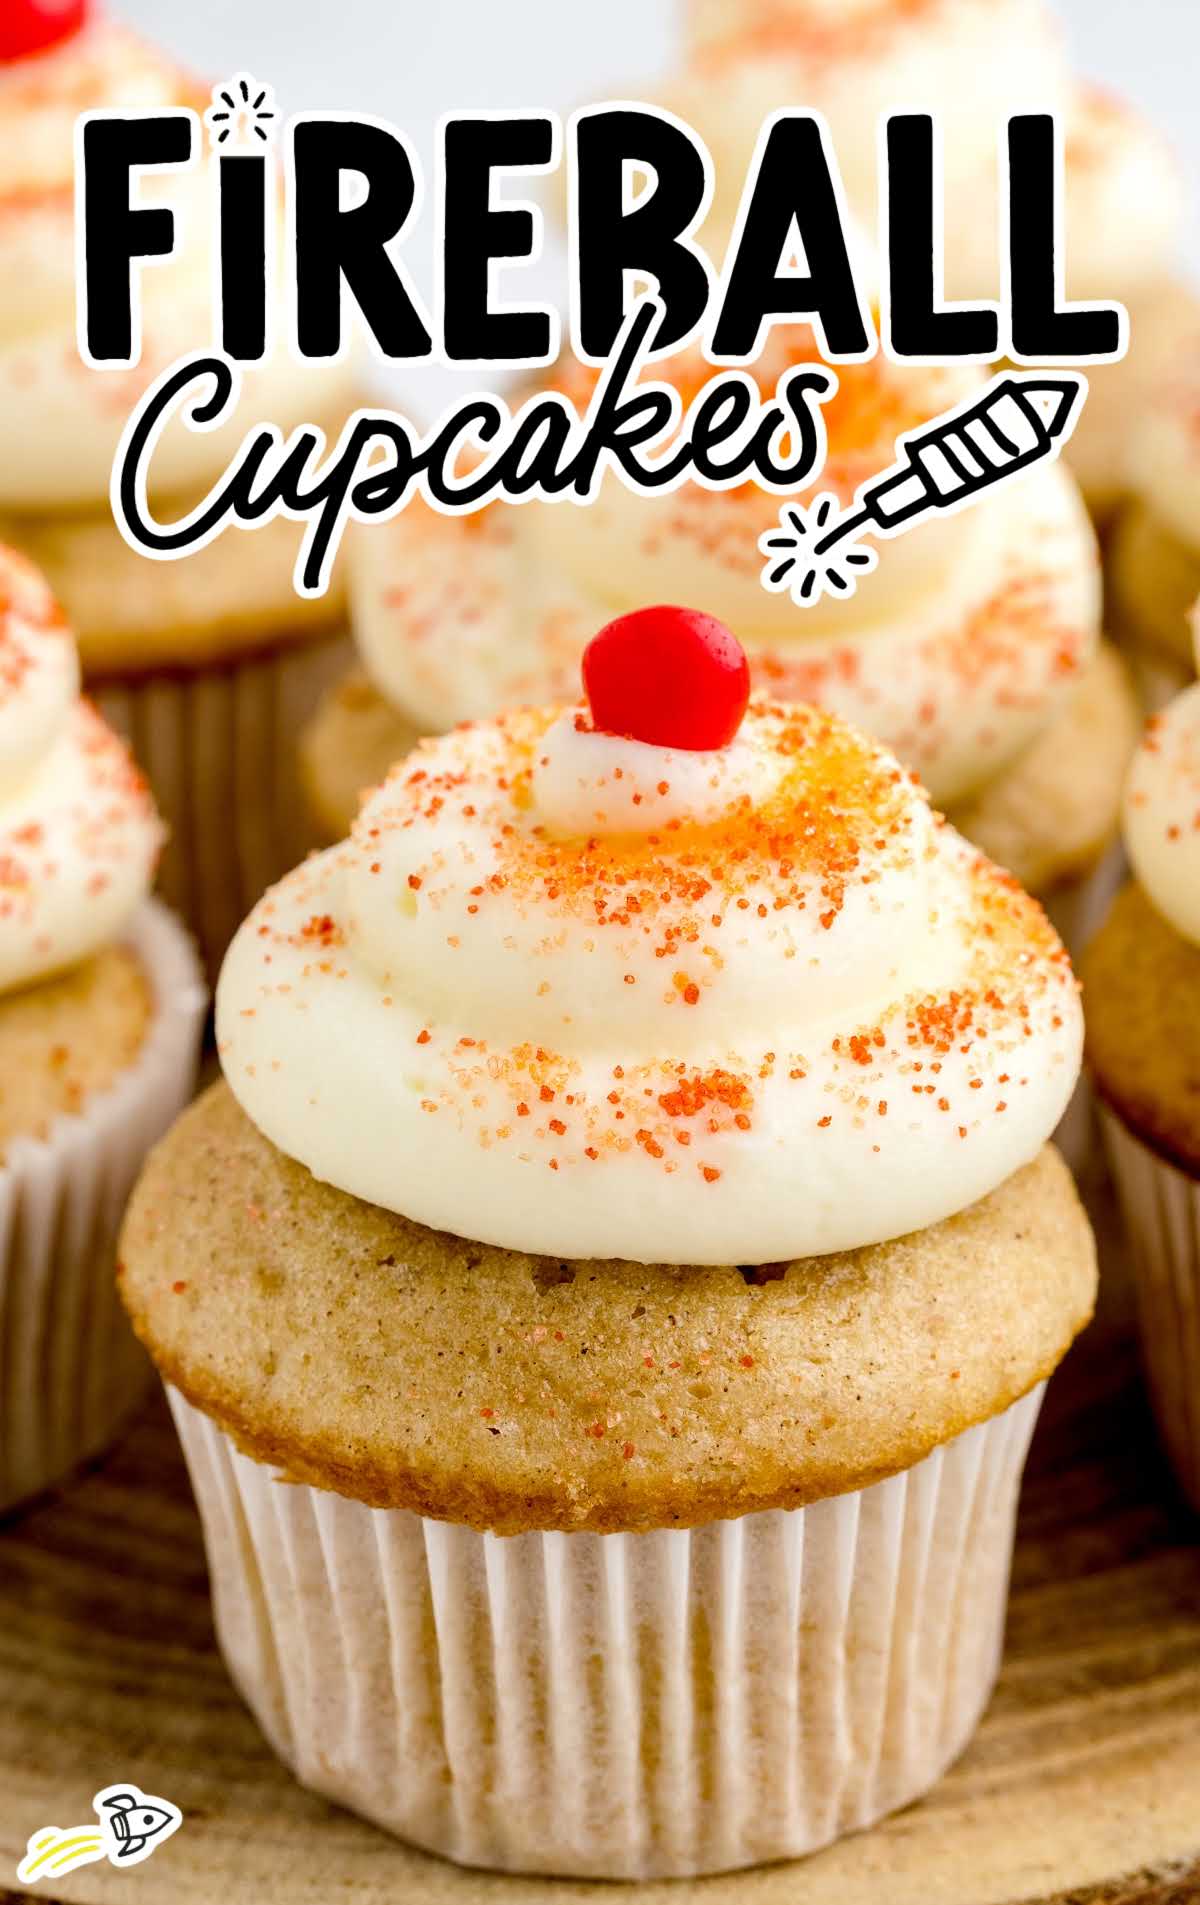 a close up shot of a Fireball Cupcakes on a wooden stand